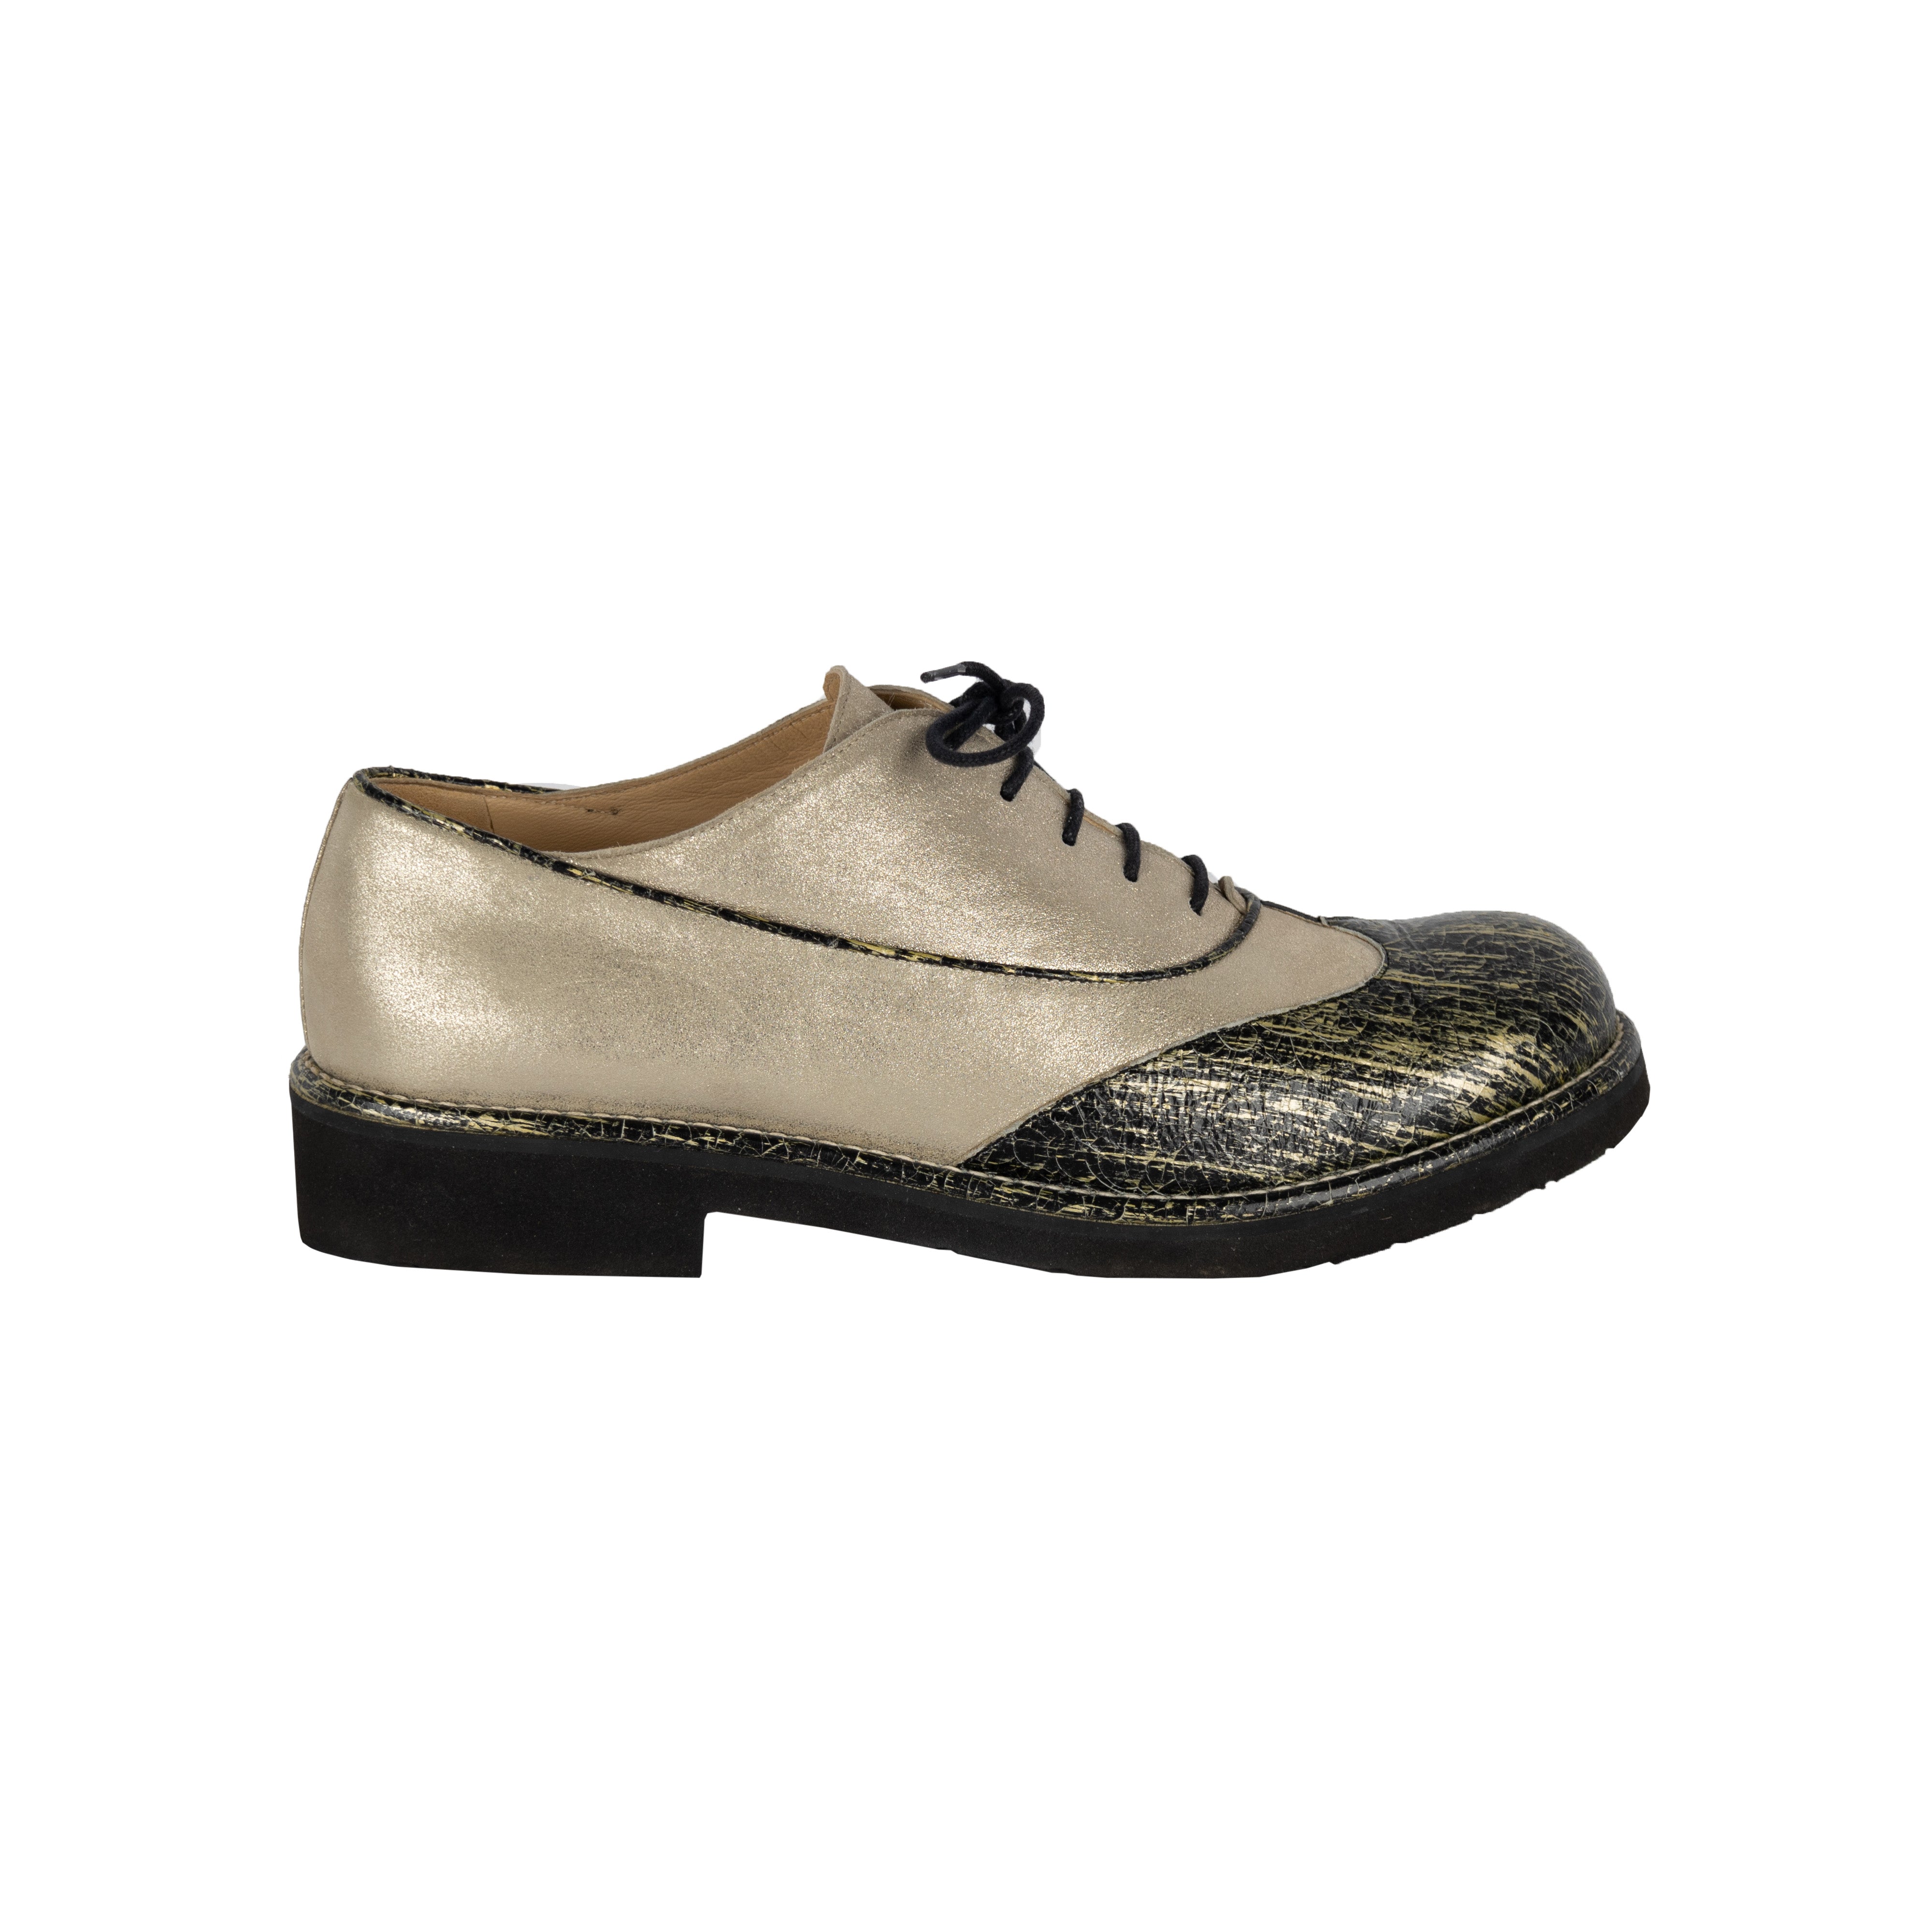 Chanel Two-tone Shimmer Lace-up Oxford Shoes Second-hand